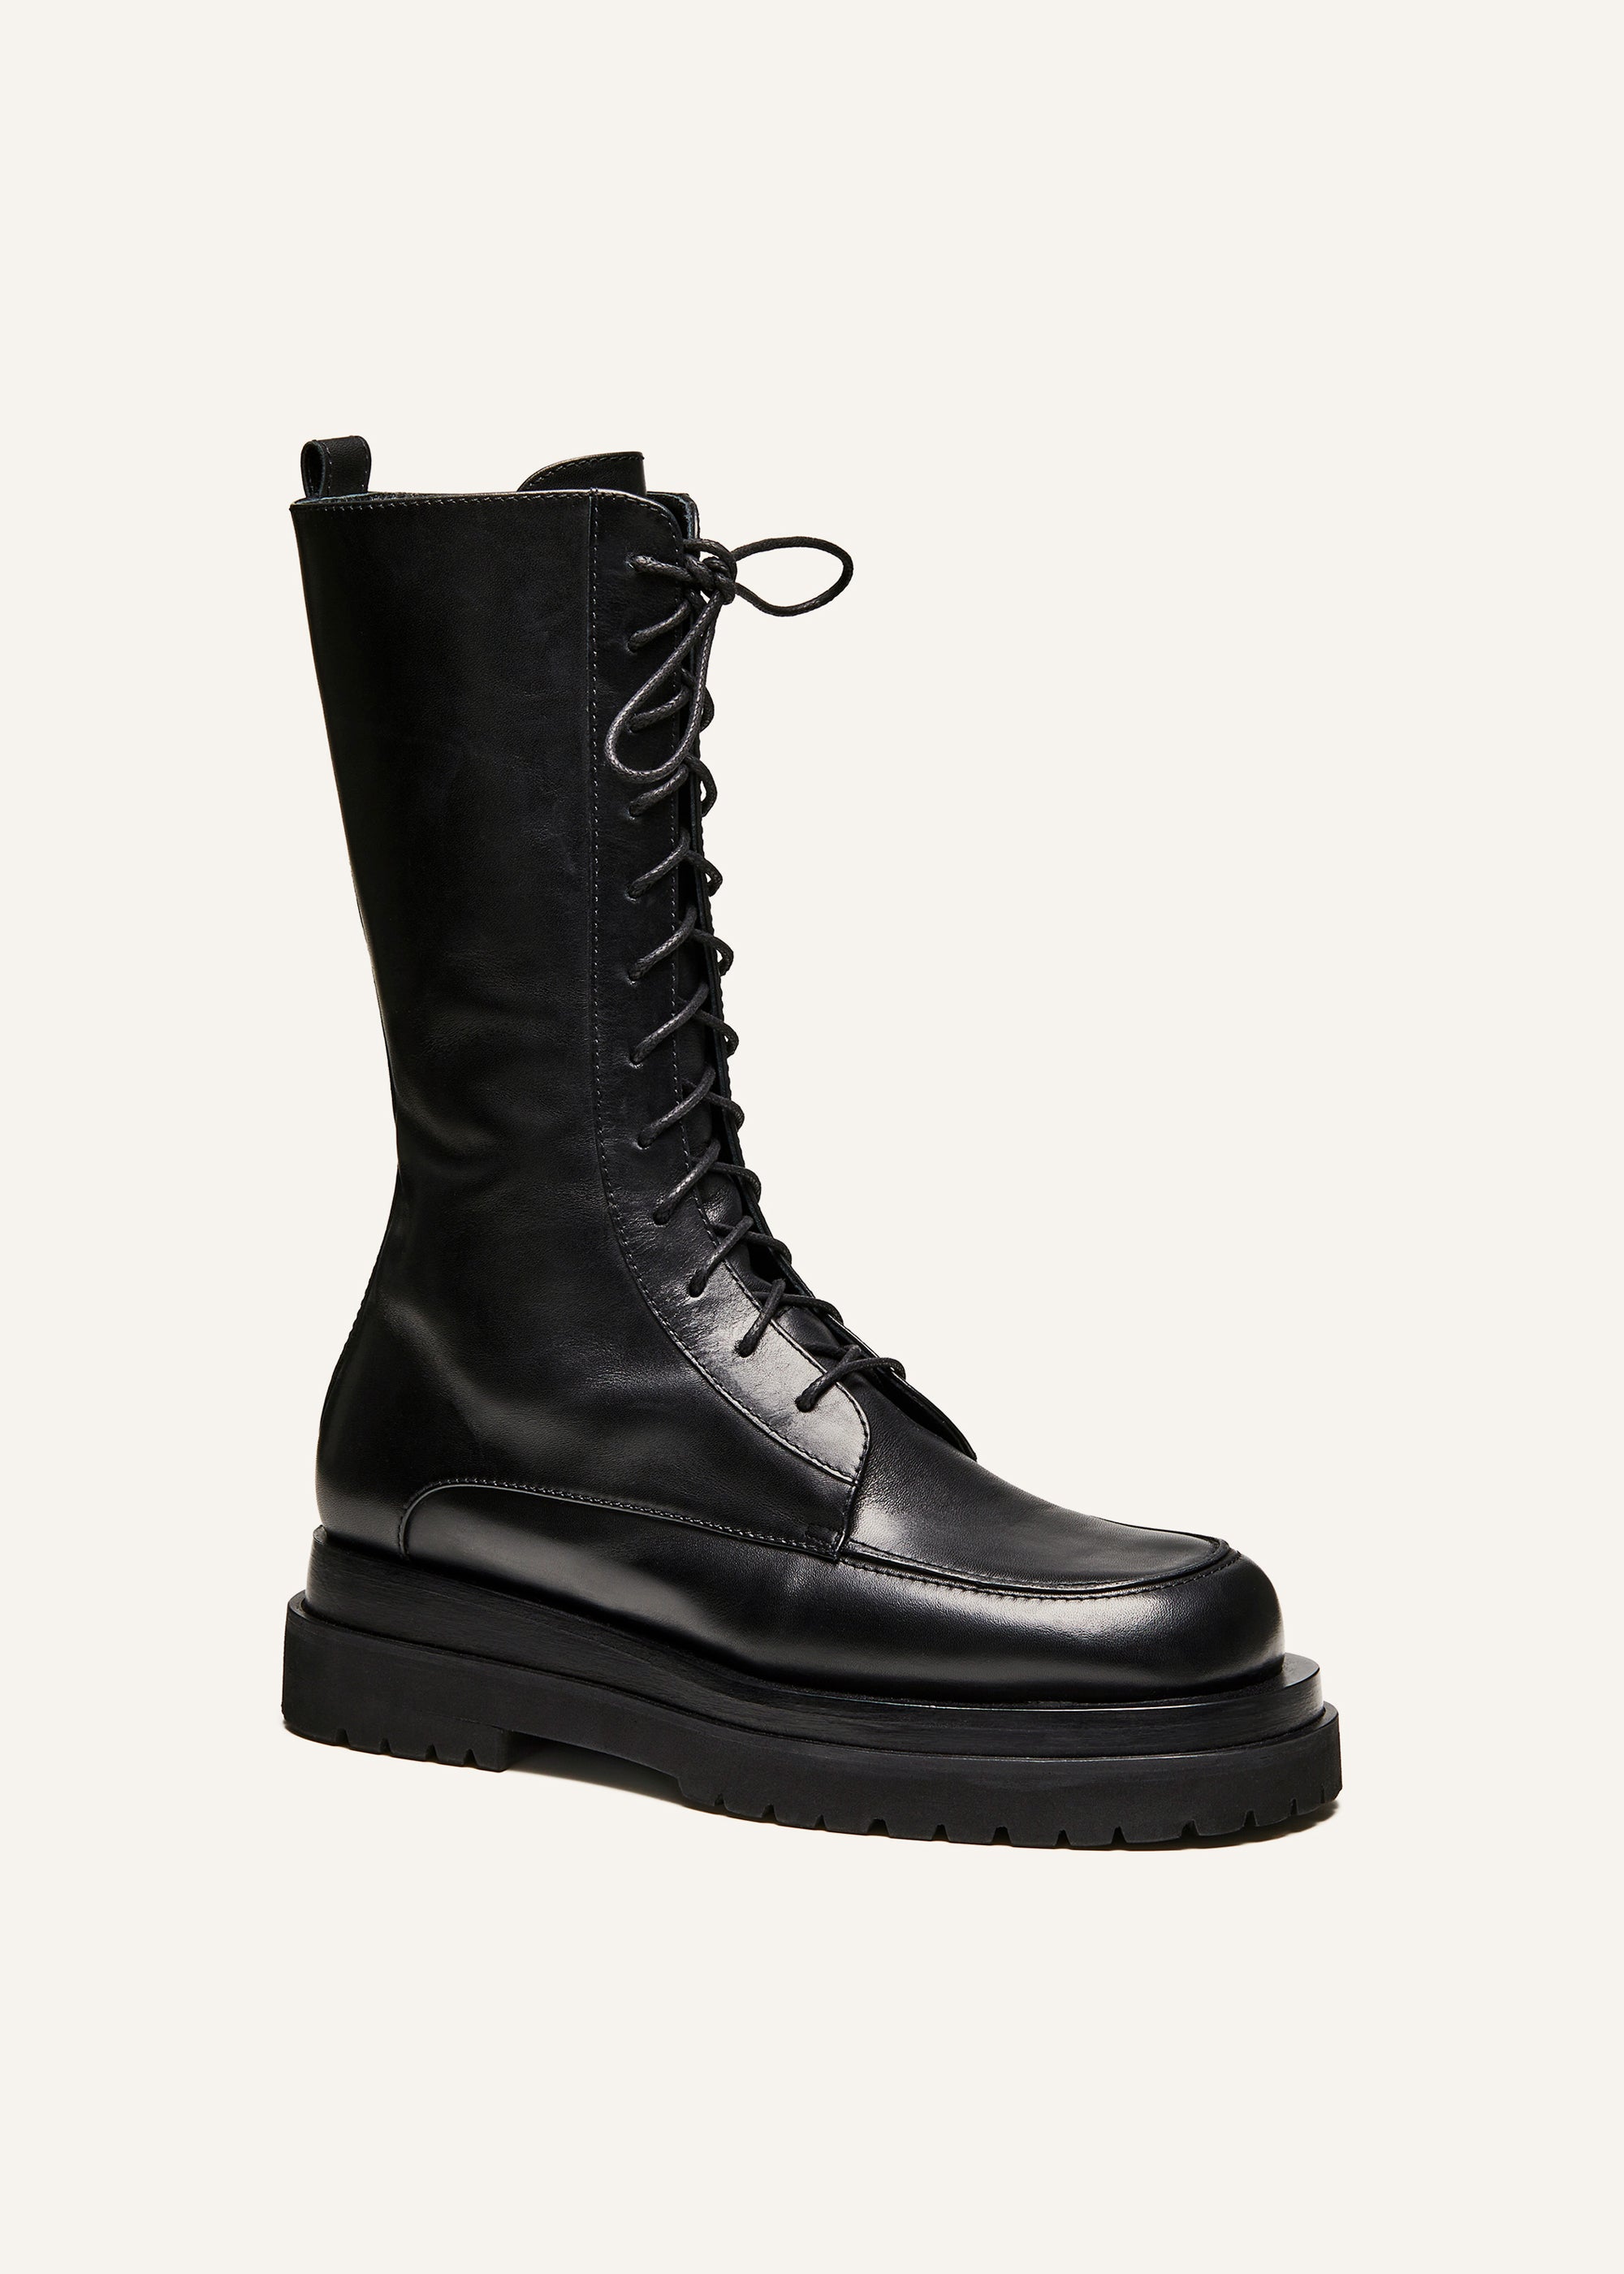 Combat boots in black leather | Magda Butrym